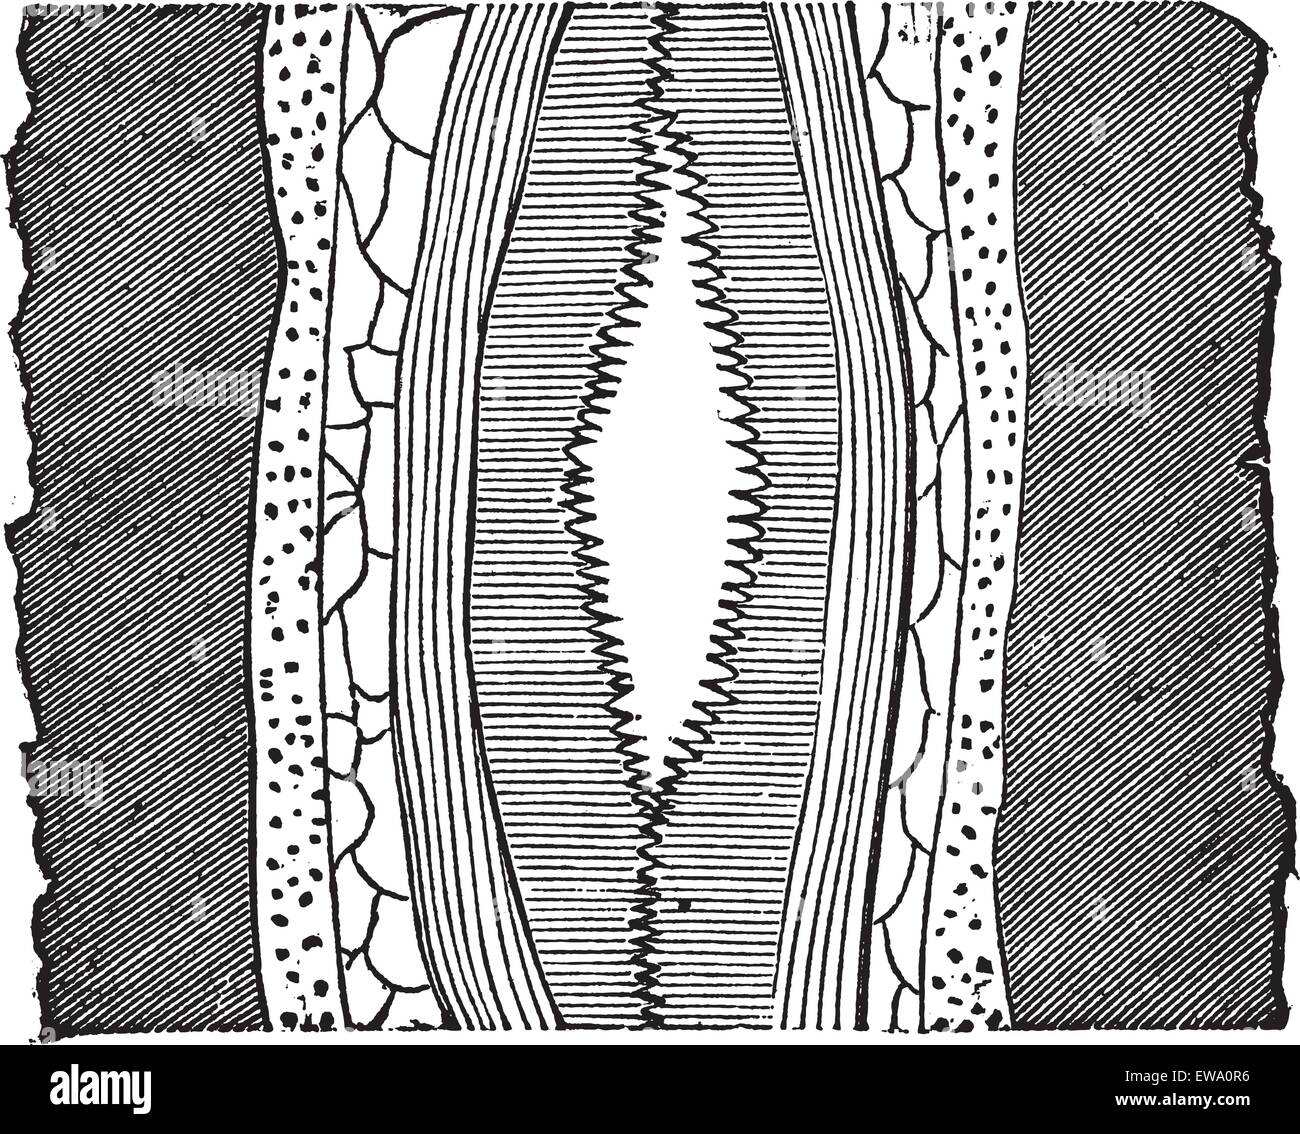 Geological Vein, illustration showing vein with cavity (center) splitting quartz into two portions, vintage engraved illustration. Trousset encyclopedia (1886 - 1891). Stock Vector